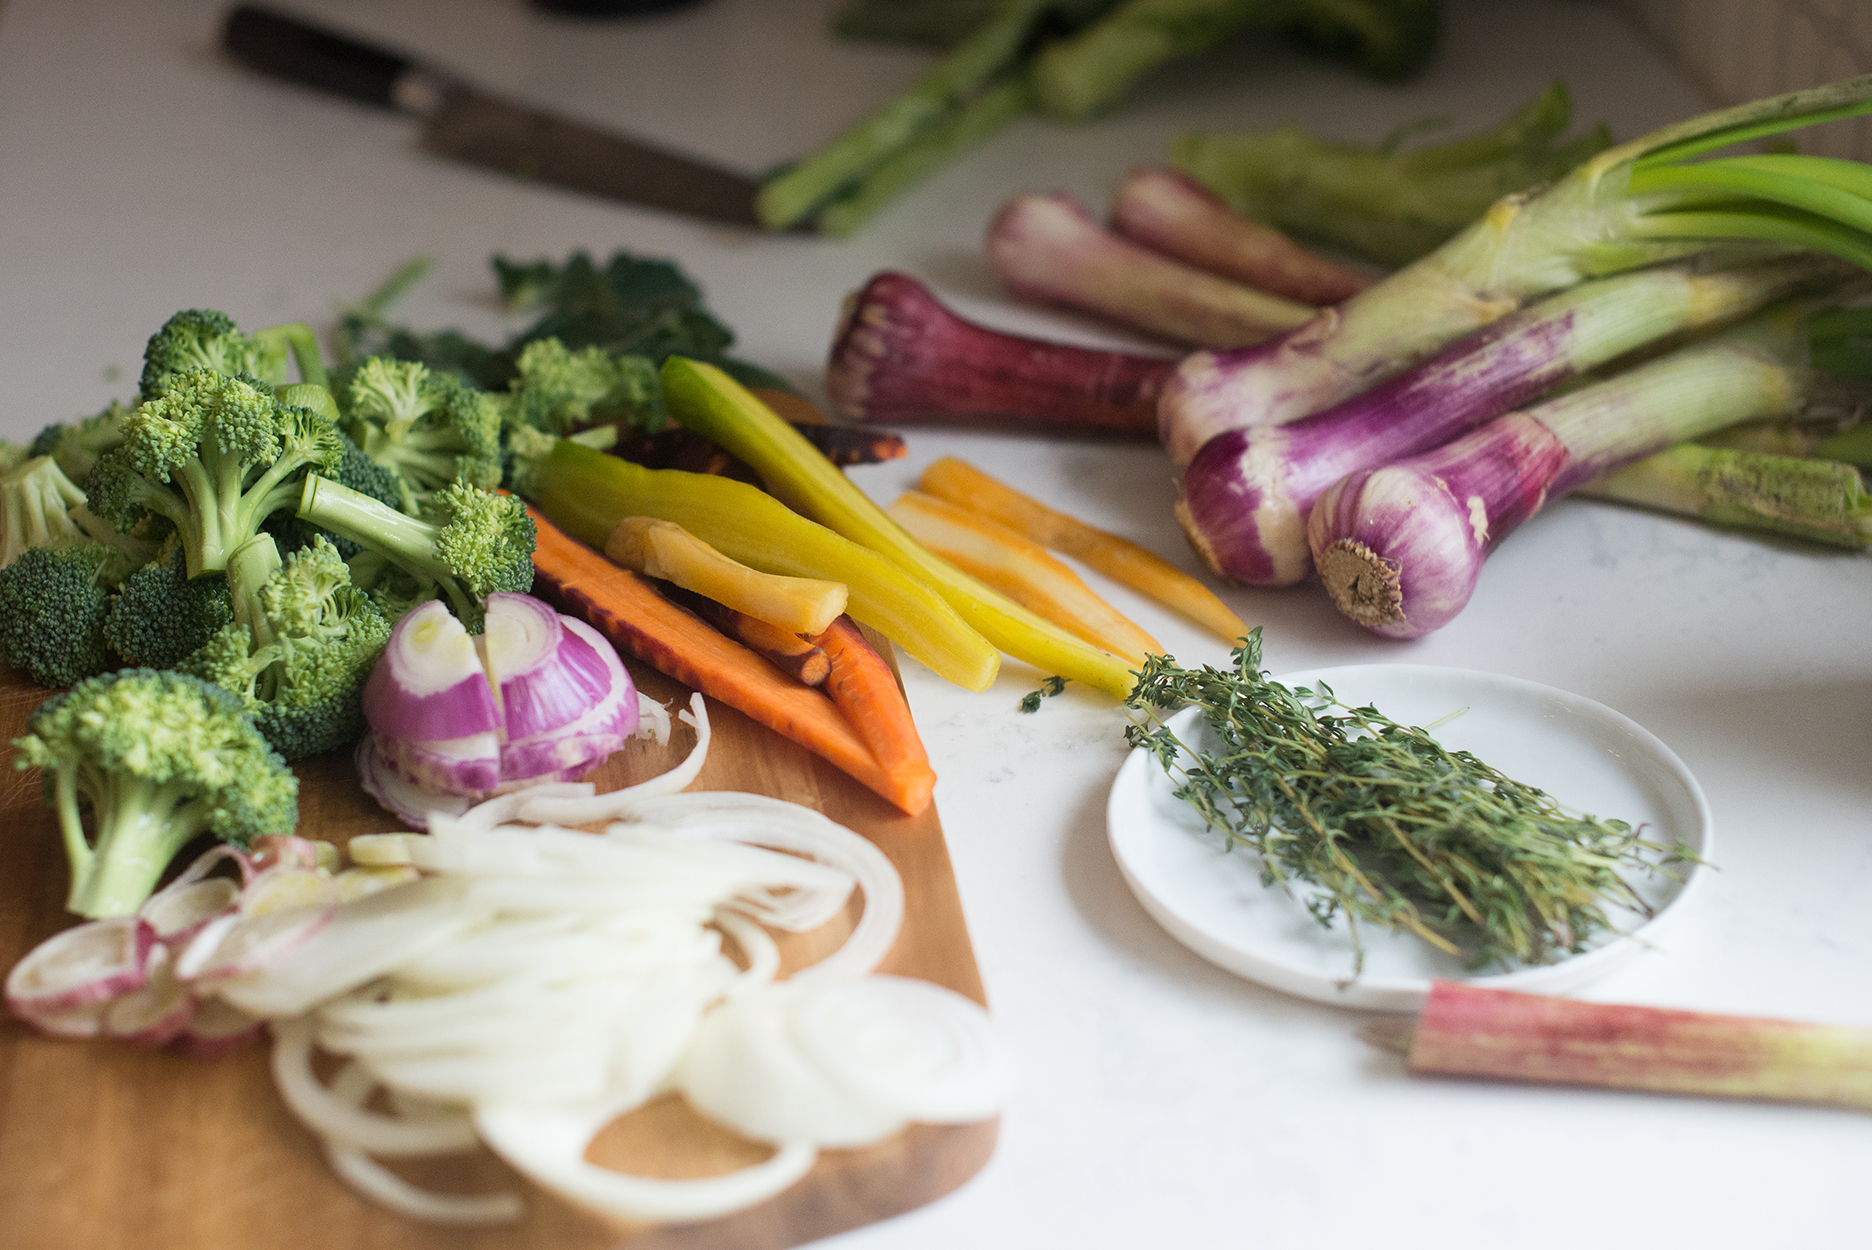 fresh broccoli, red onions, green garlic, carrots and thyme on a wooden cutting board